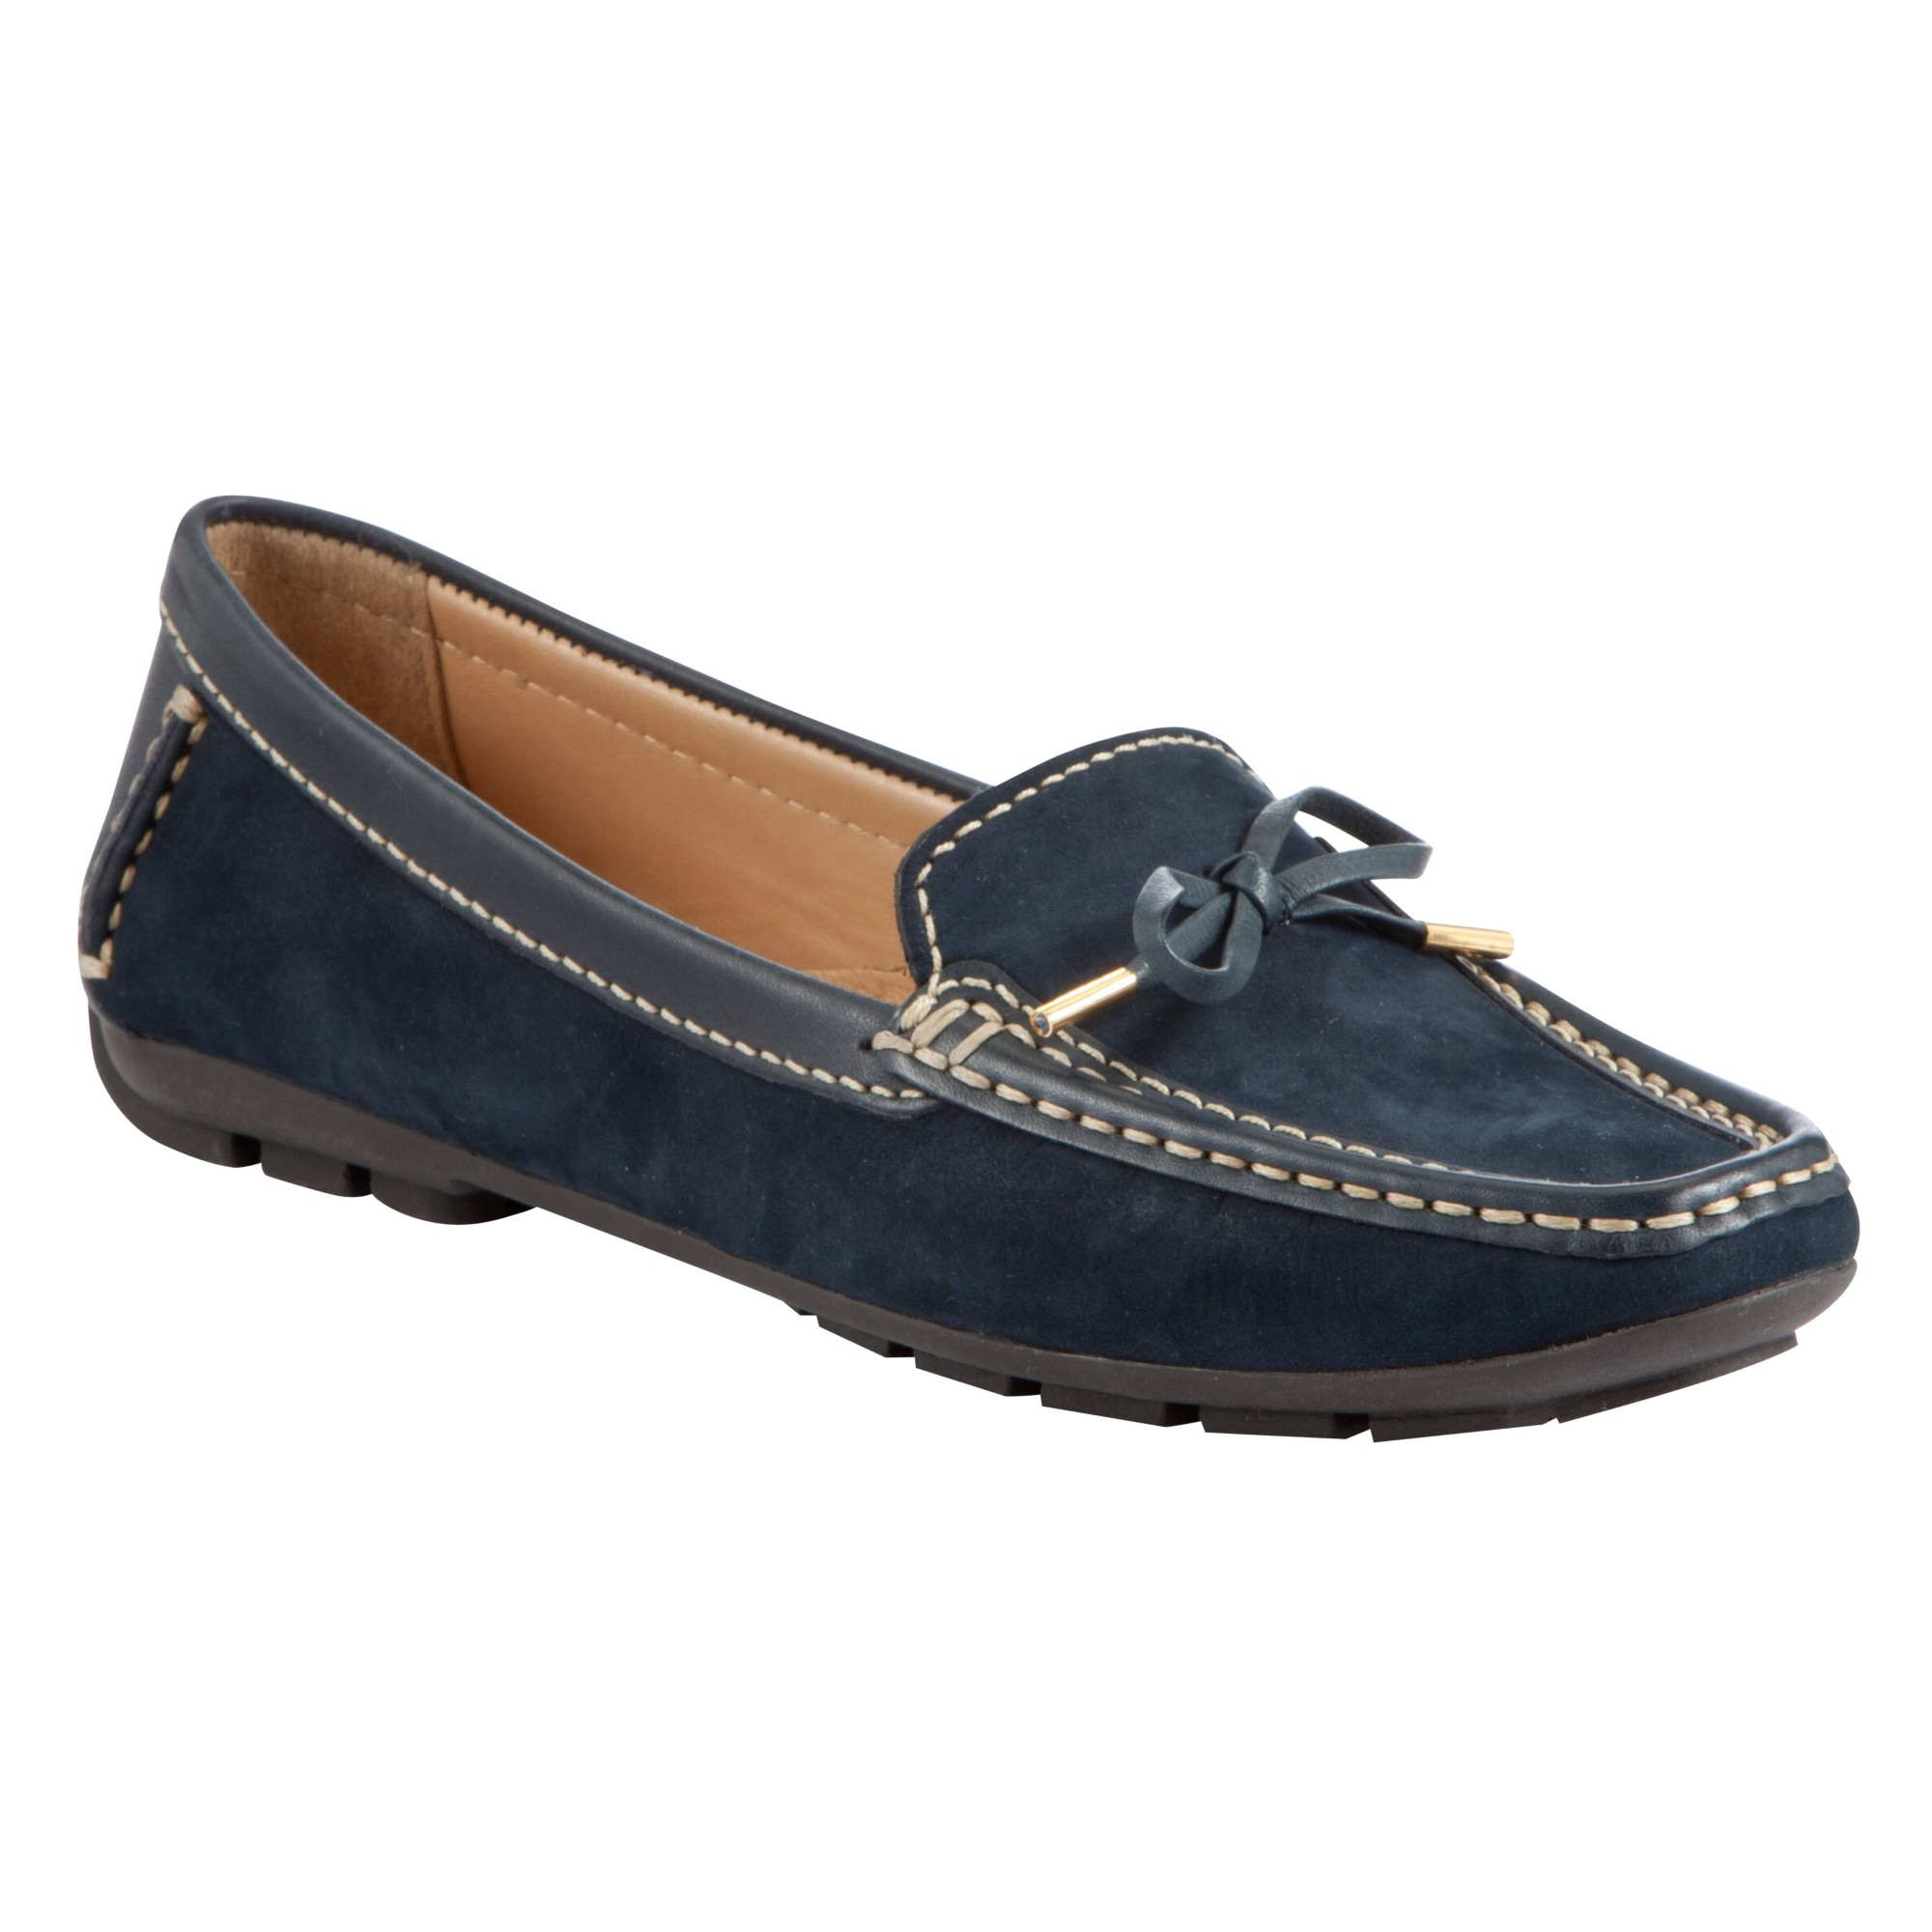 John Lewis Vermont Nubuck Leather Trim Moccasin Loafers in Blue (Navy ...